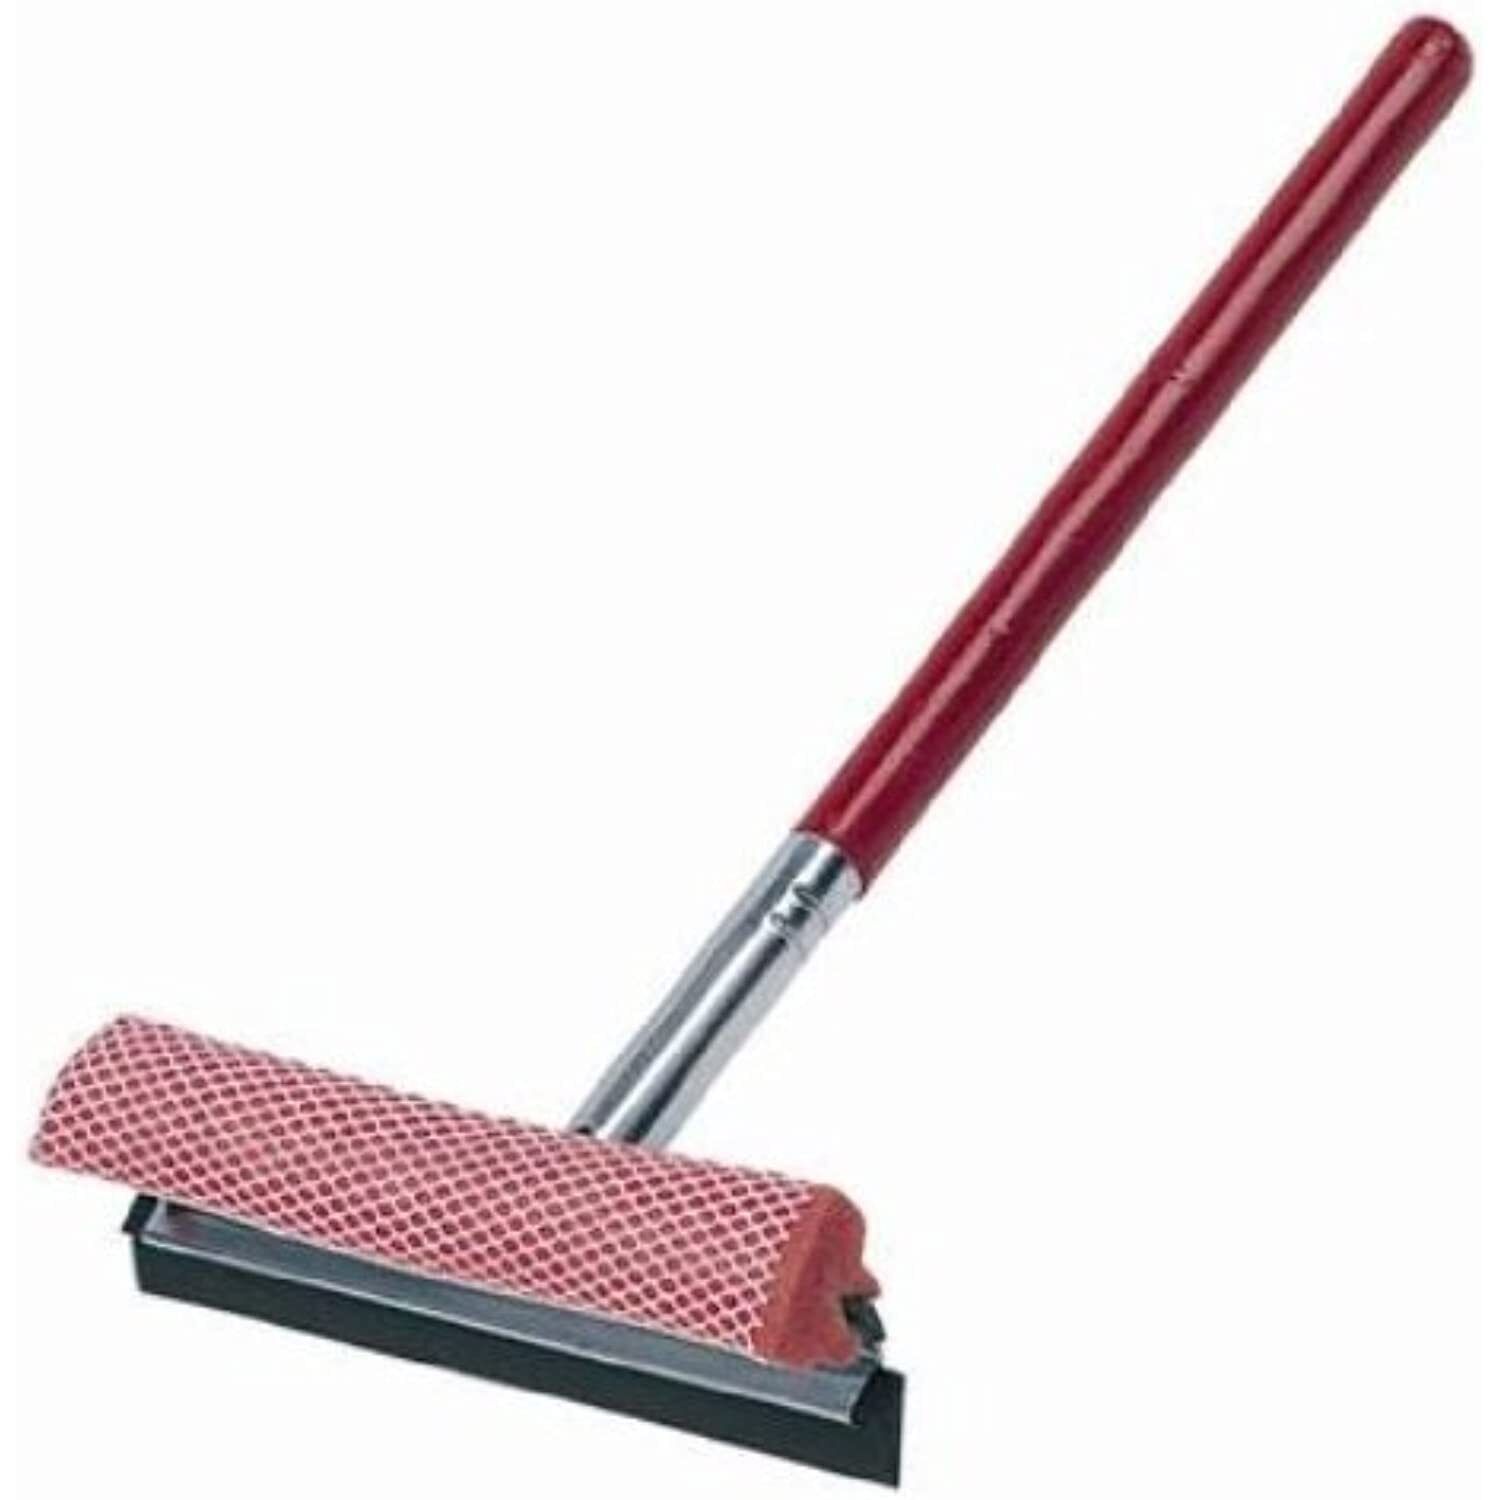 Carrand 9032r Red 8" Metal Squeegee Head With 24" Wood Handle